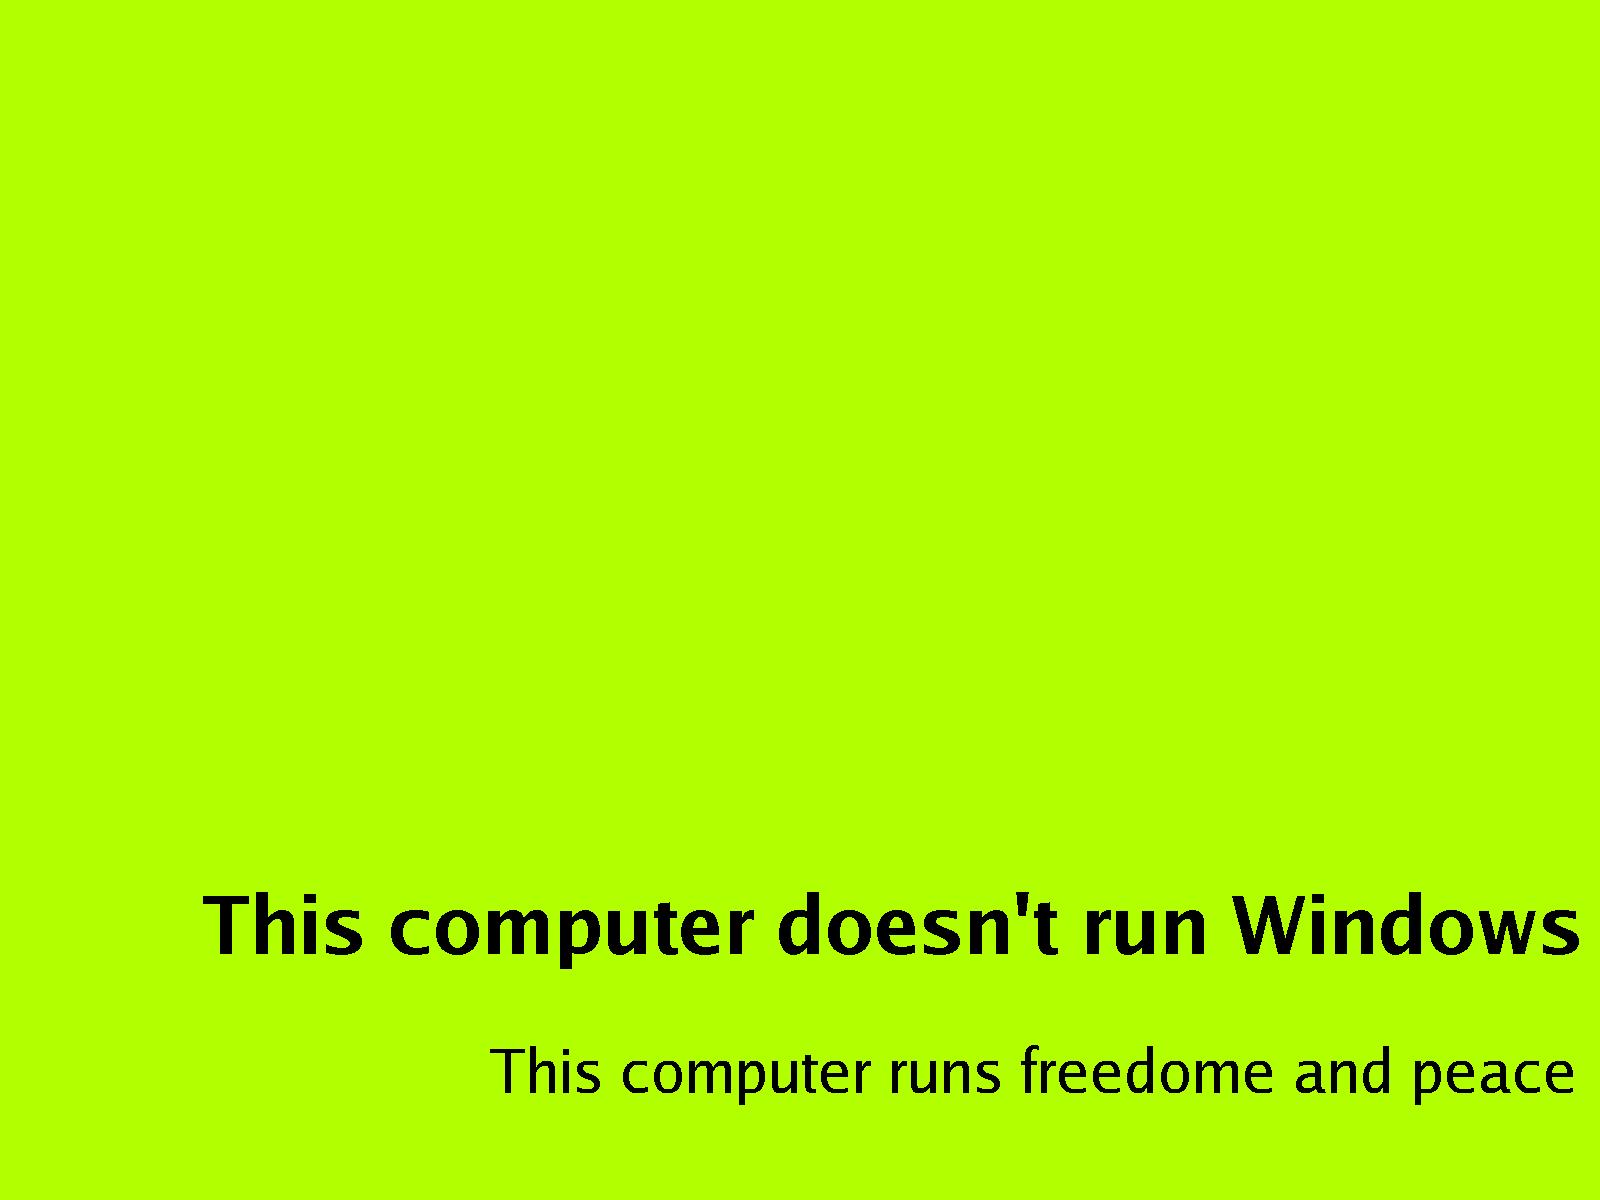 Not Windows but freedome and peace